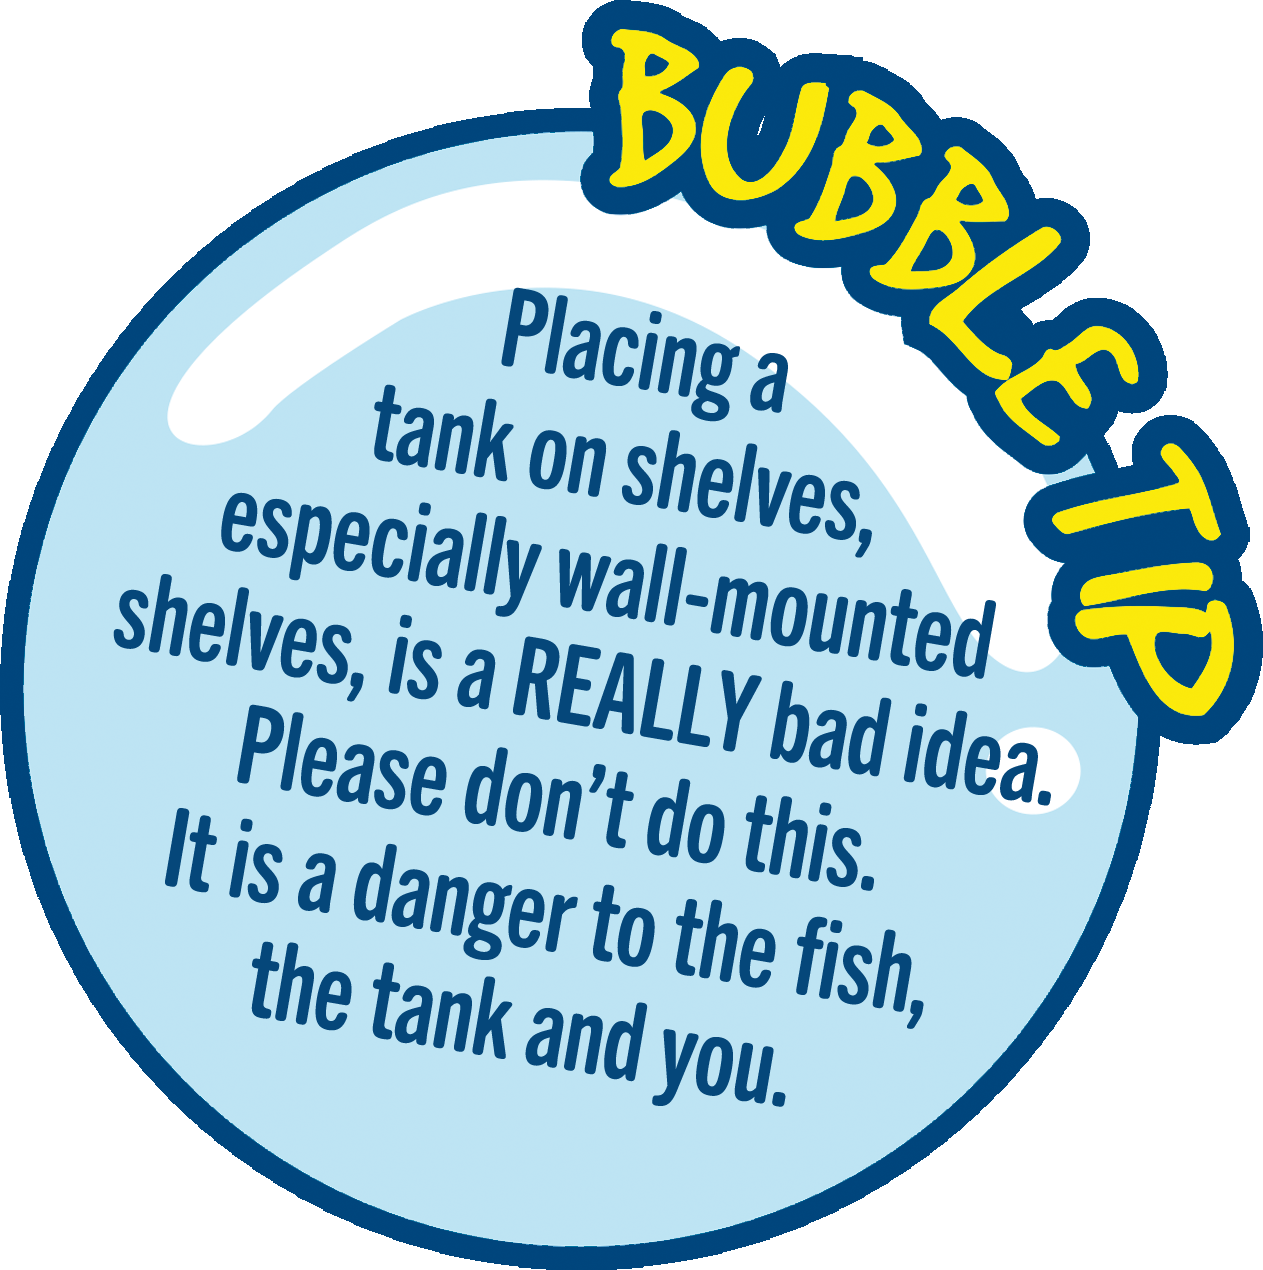 Placing a tank on shelves, especially wall-mounted shelves, is a REALLY bad idea. Please don’t do this. It is a danger to the fish, the tank and you.